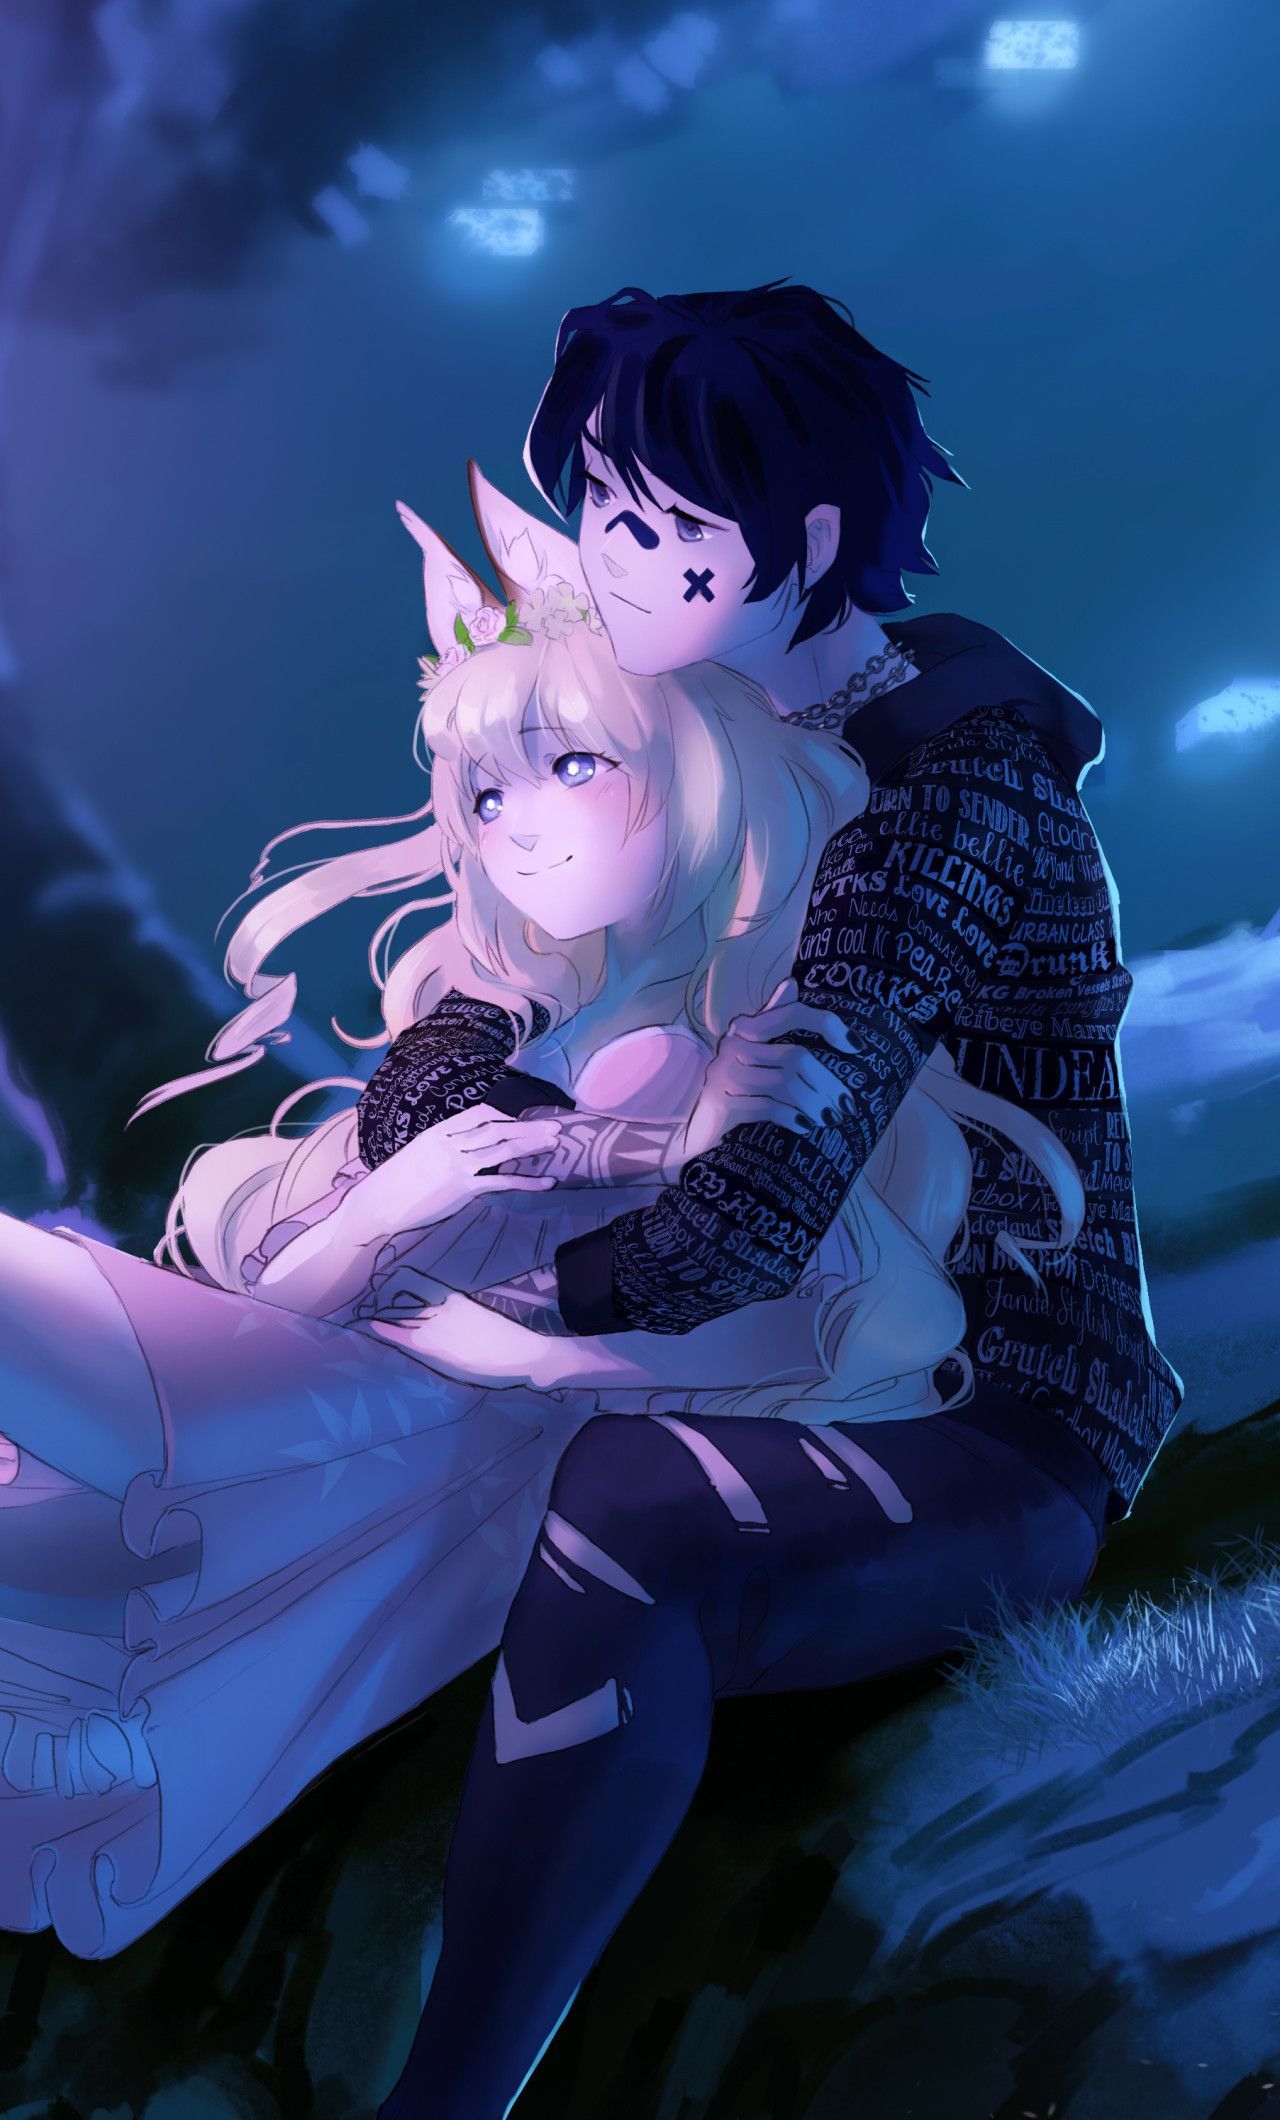 Anime Couple Wallpaper 4k 1280x2120 Embraced And Endeared Anime Couple 4k iPhone 6 HD Anim. HD anime wallpaper, Android wallpaper anime, Anime wallpaper iphone